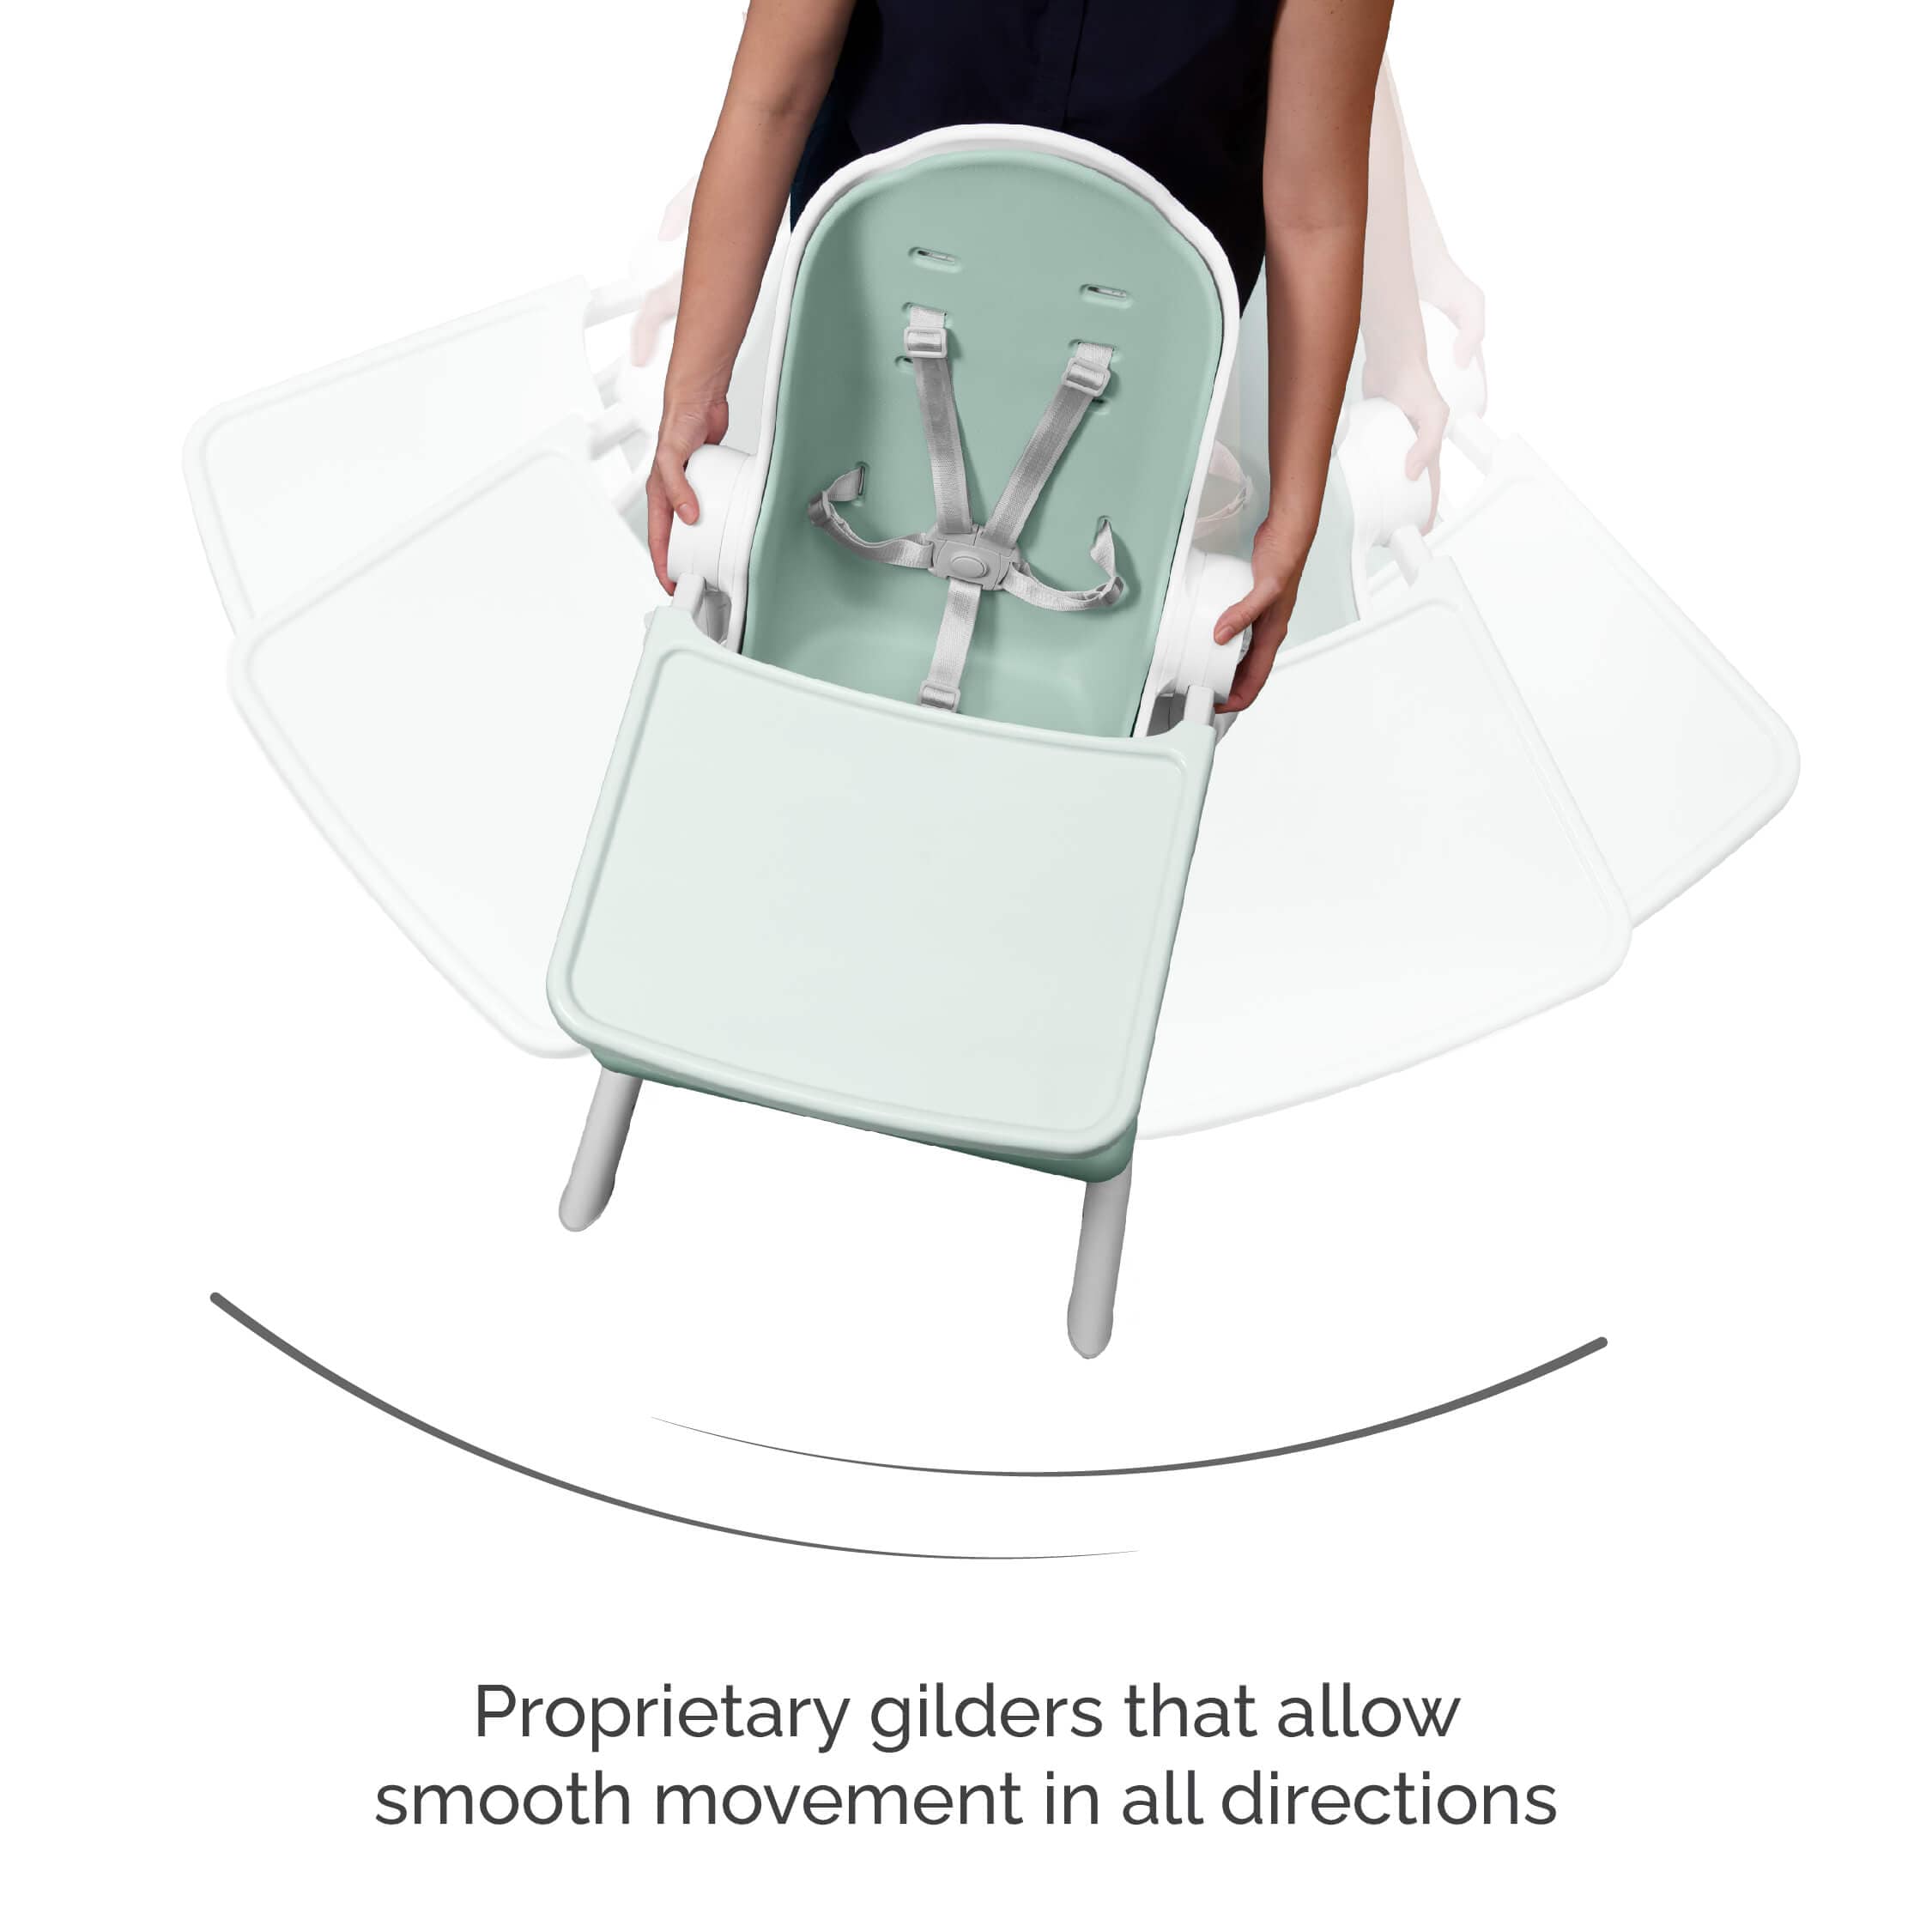 Stylish and Practical: Cocoon Z High Chair | Lounger in Avocado Green